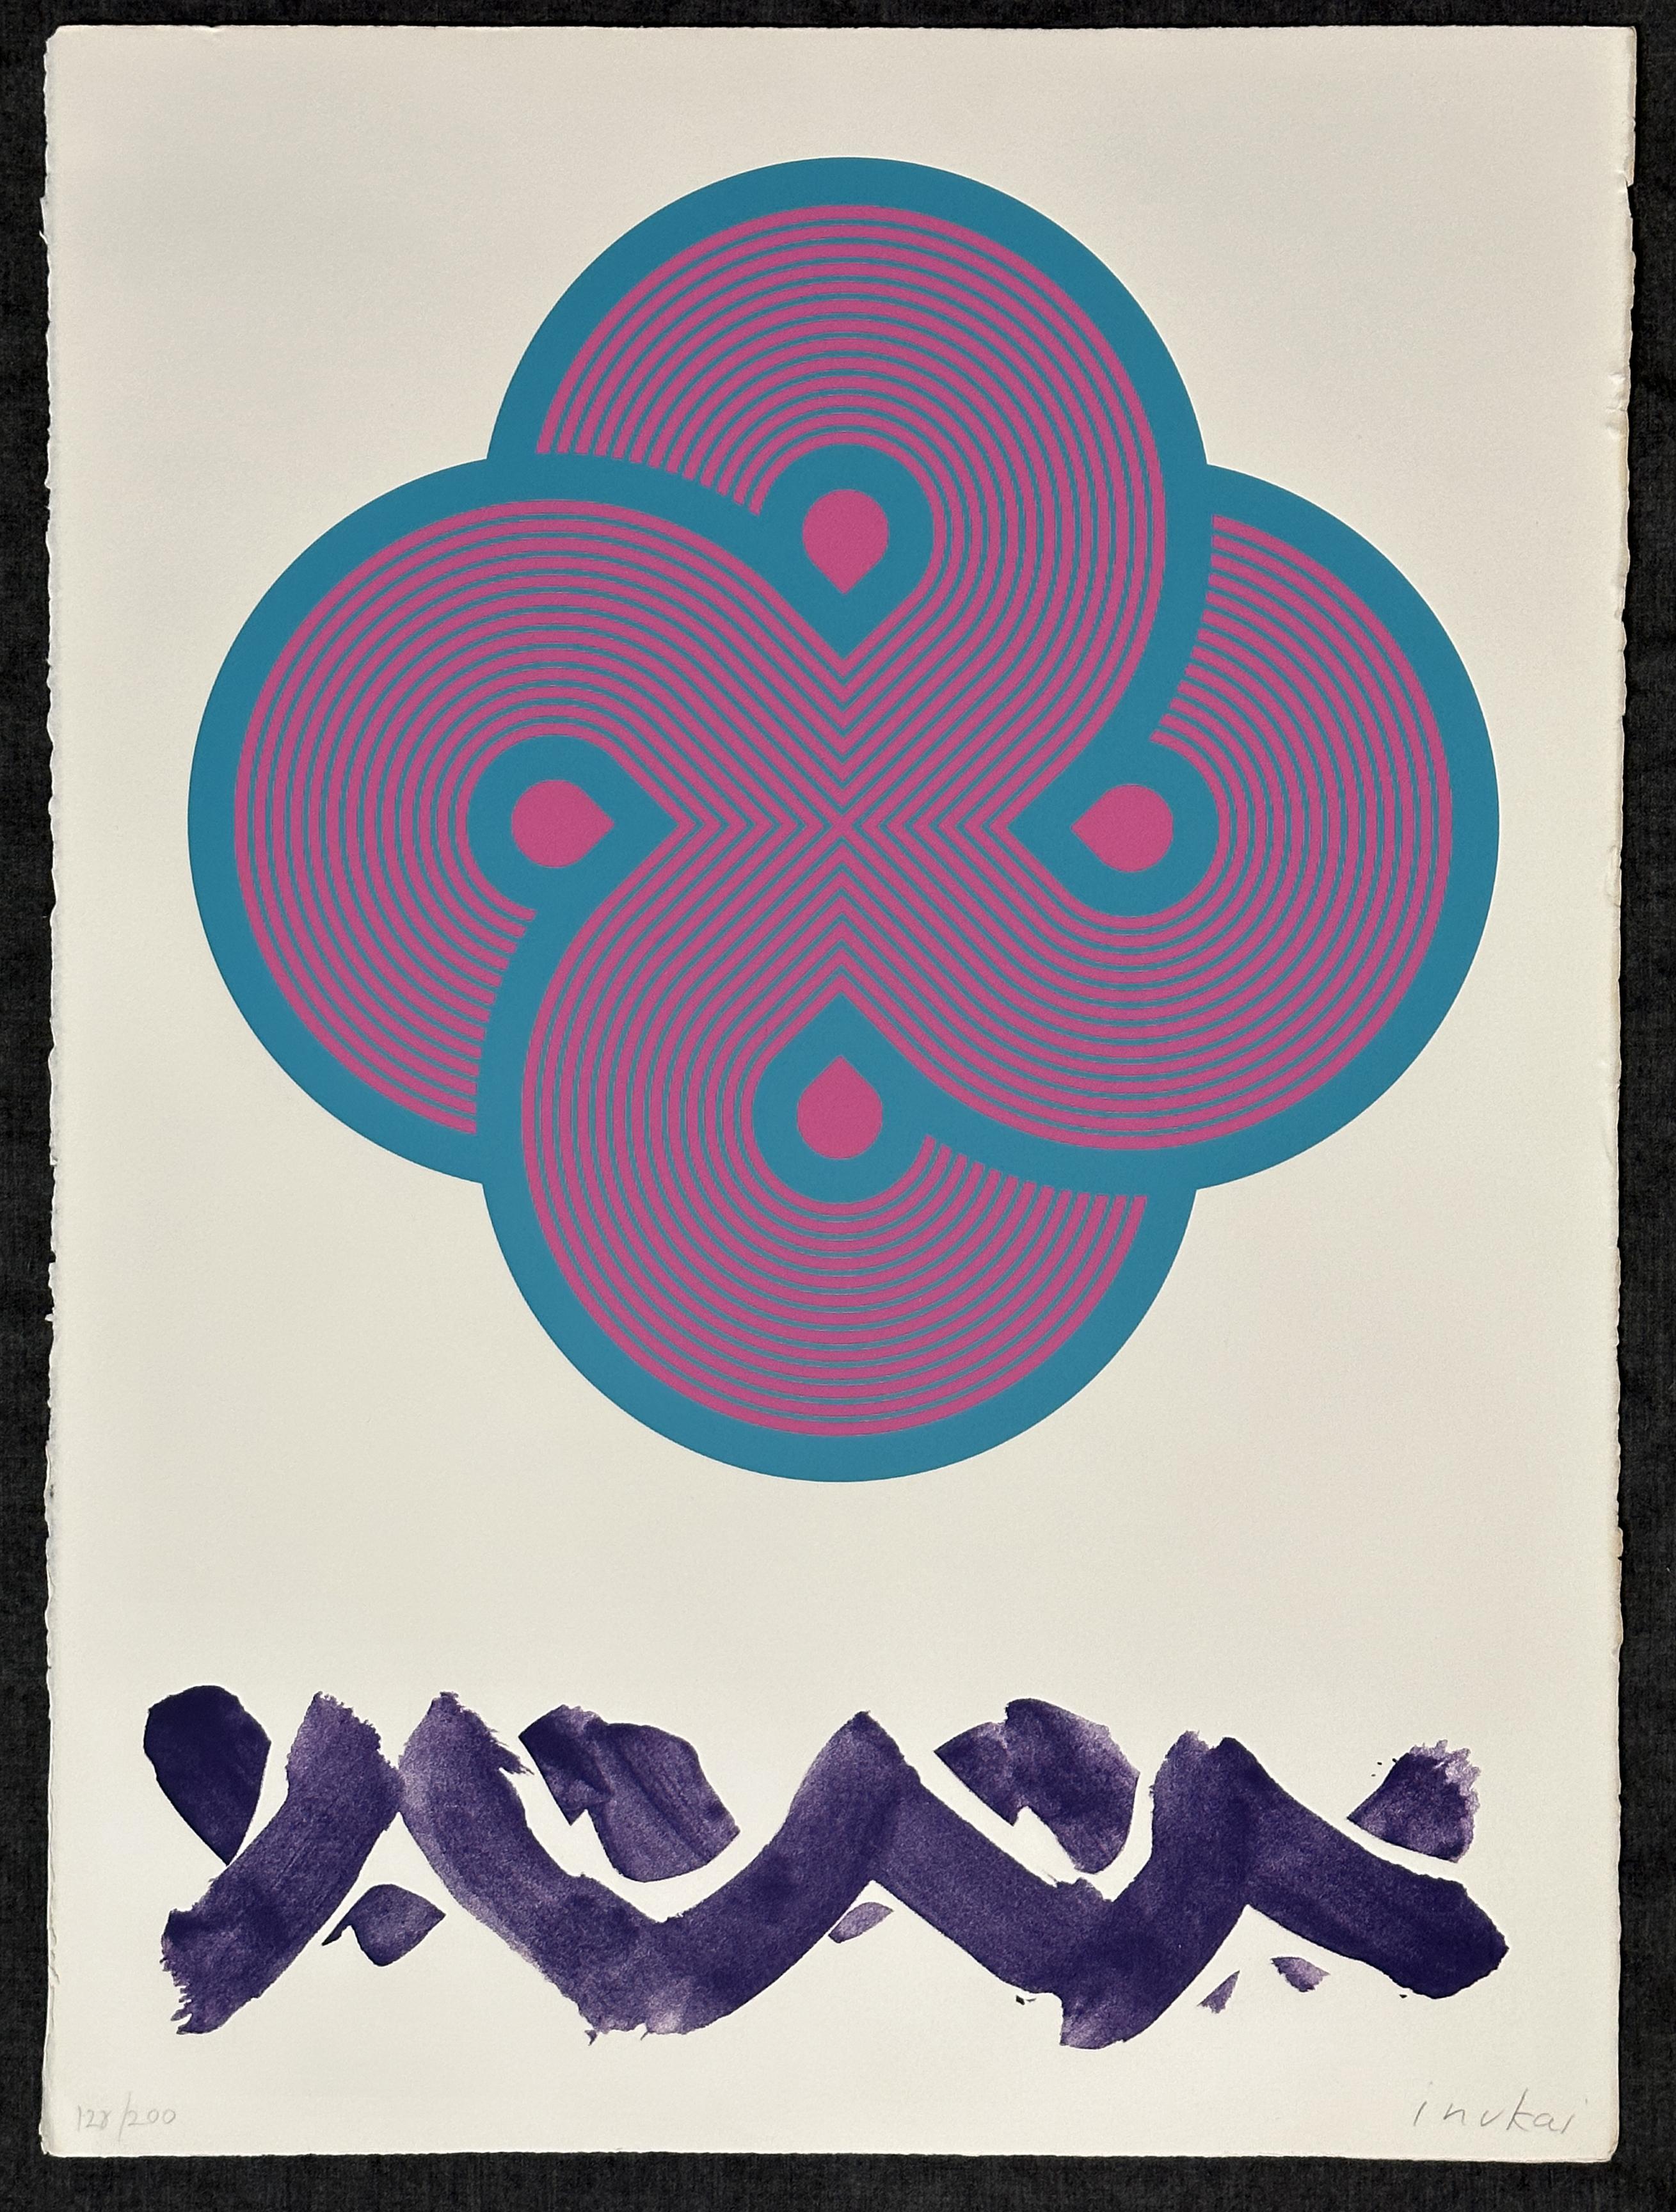 Kyohei Inukai
Life Forces - 1978
Print - Silkscreen   30'' x 22½'' in
Edition: signed in pencil and marked 128/200

Since the 1940s, Kyohei Inukai has created his own brand of illusionary art. Distinctively fine edges and careful tonal variations